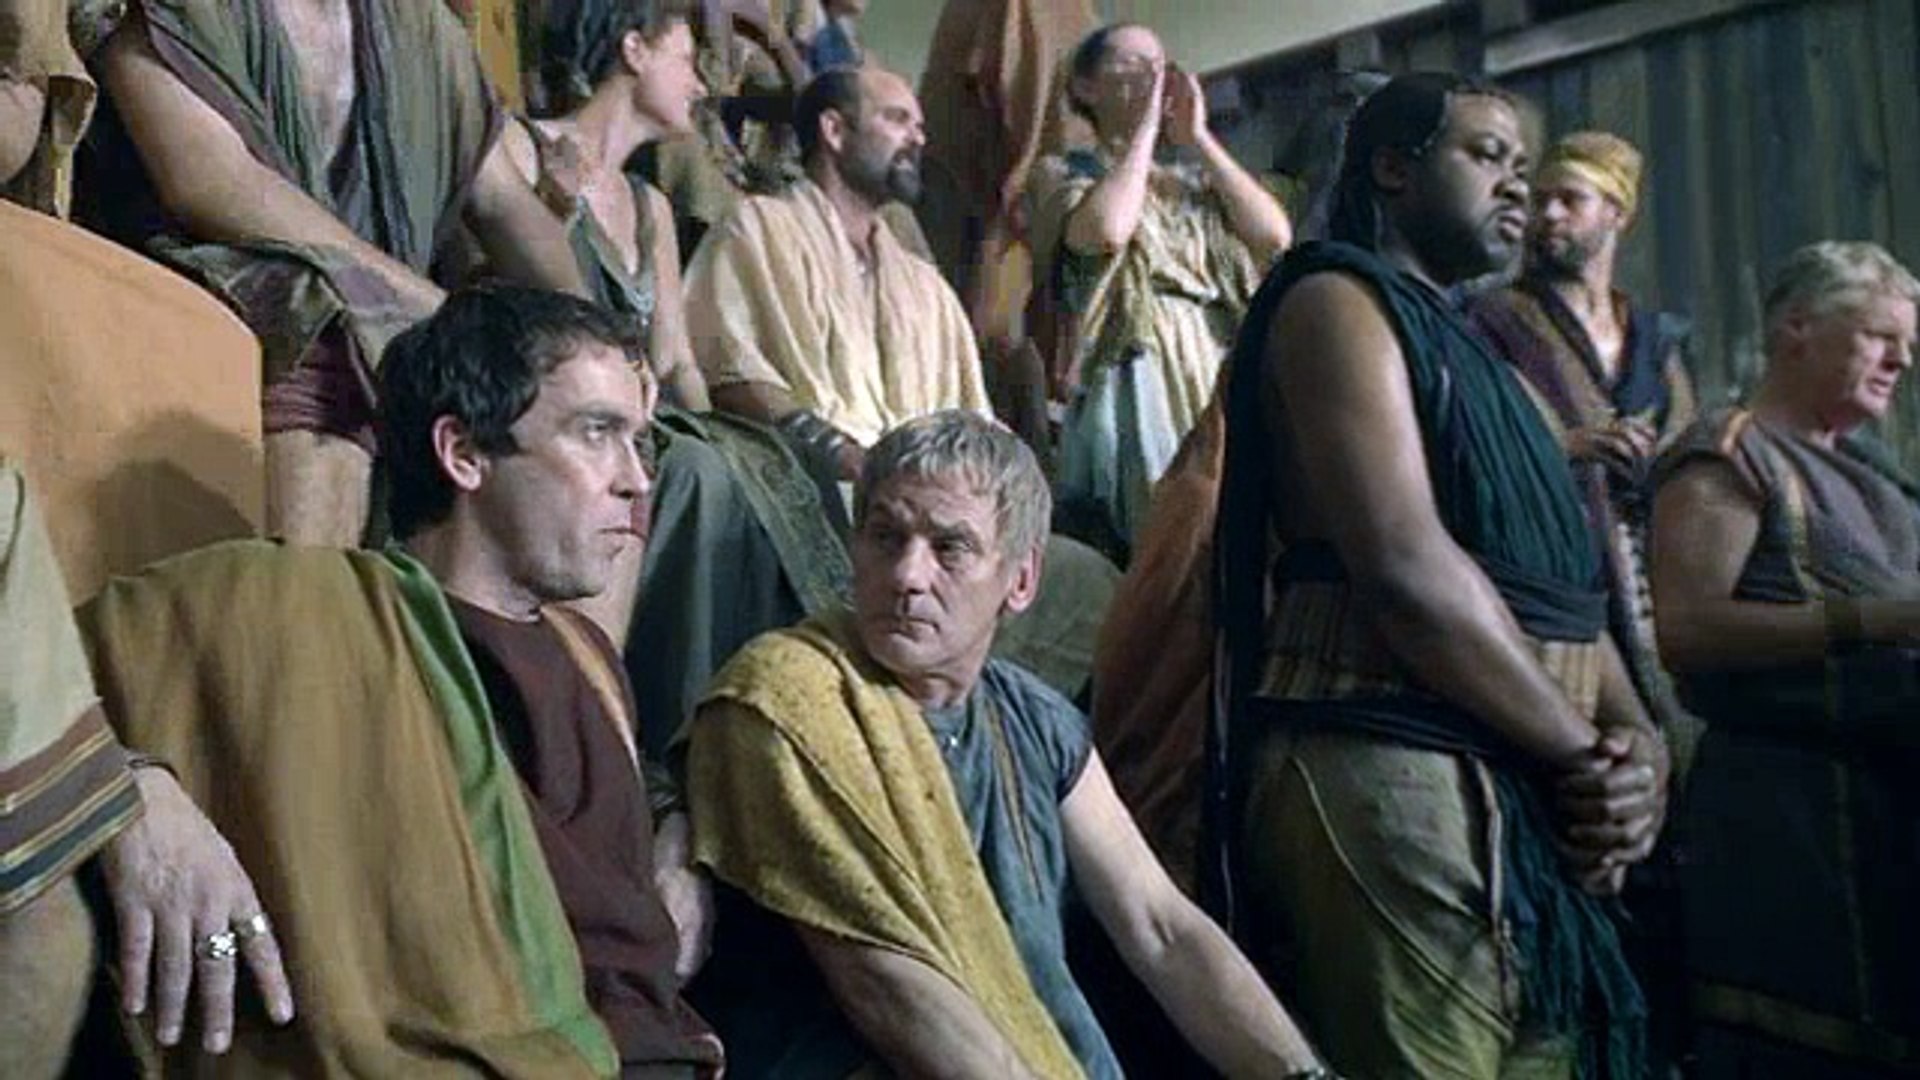 Spartacus: Gods of the Arena Season 1 - episodes streaming online